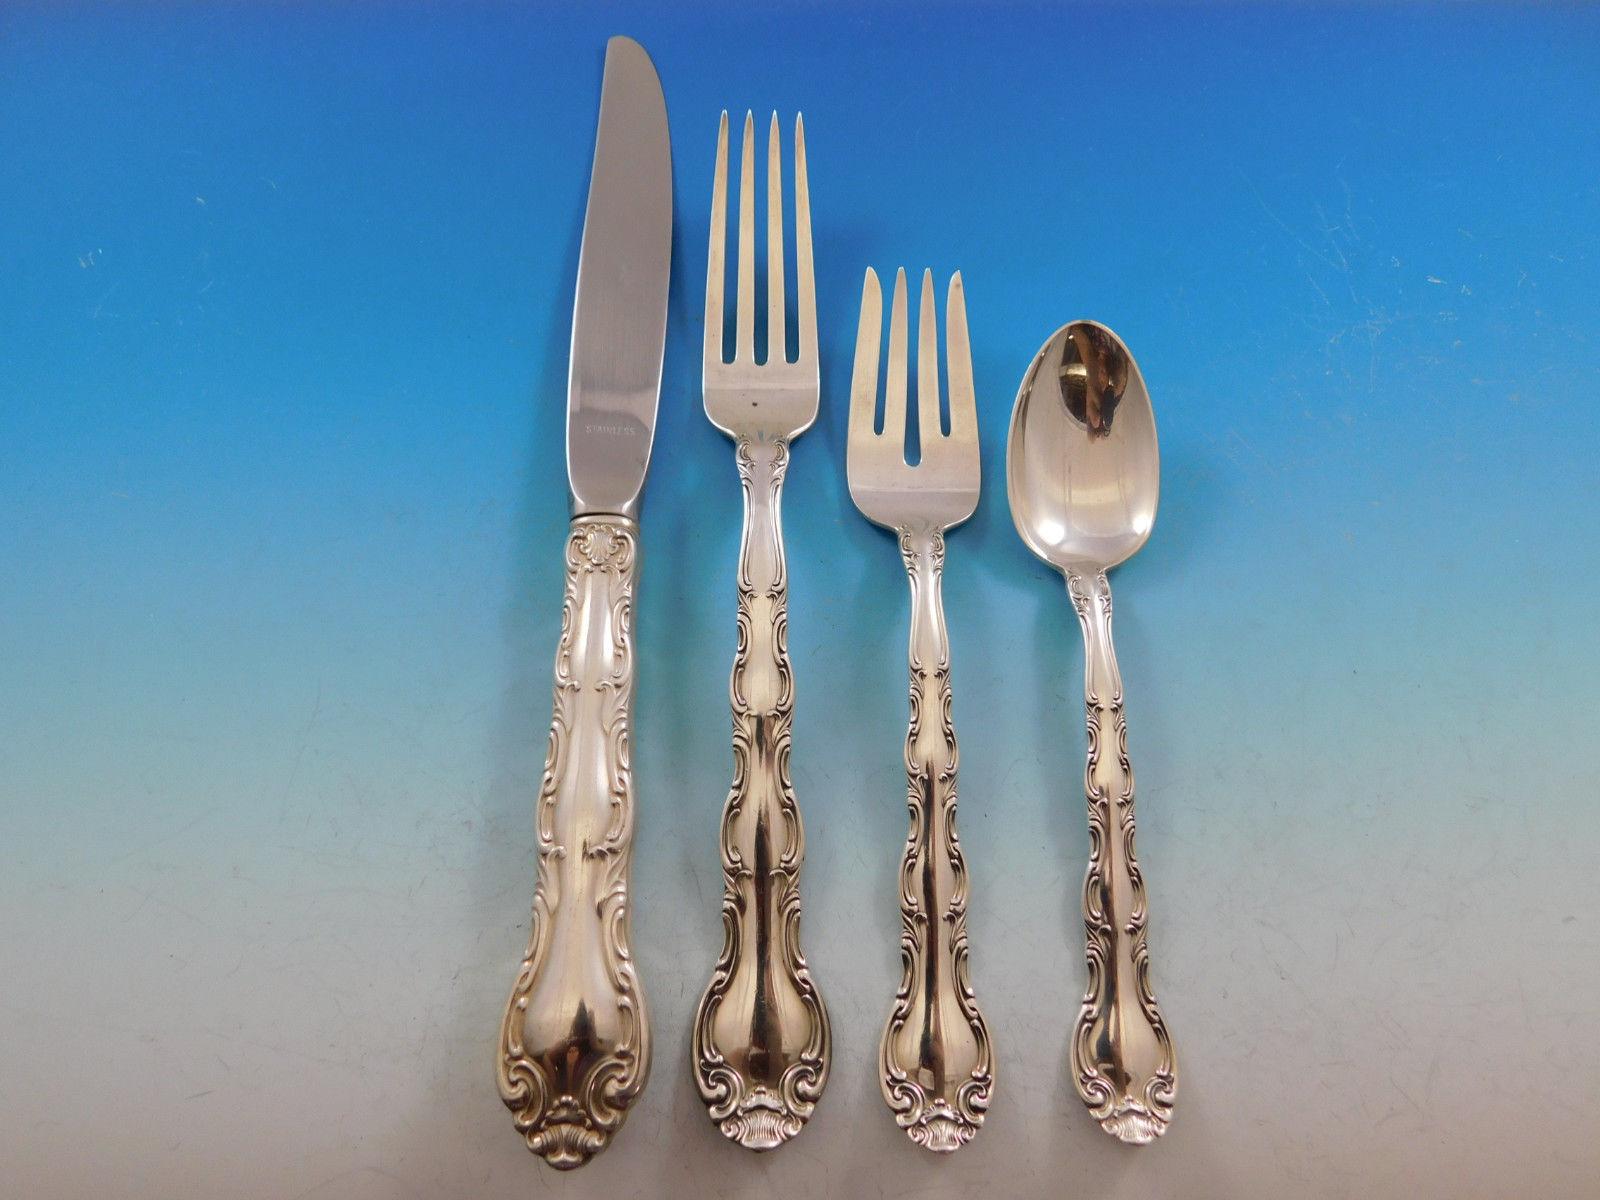 Dinner size French scroll by Alvin sterling silver flatware set, 36 pieces. Great starter set! This set includes:

Six dinner size knives, 9 5/8